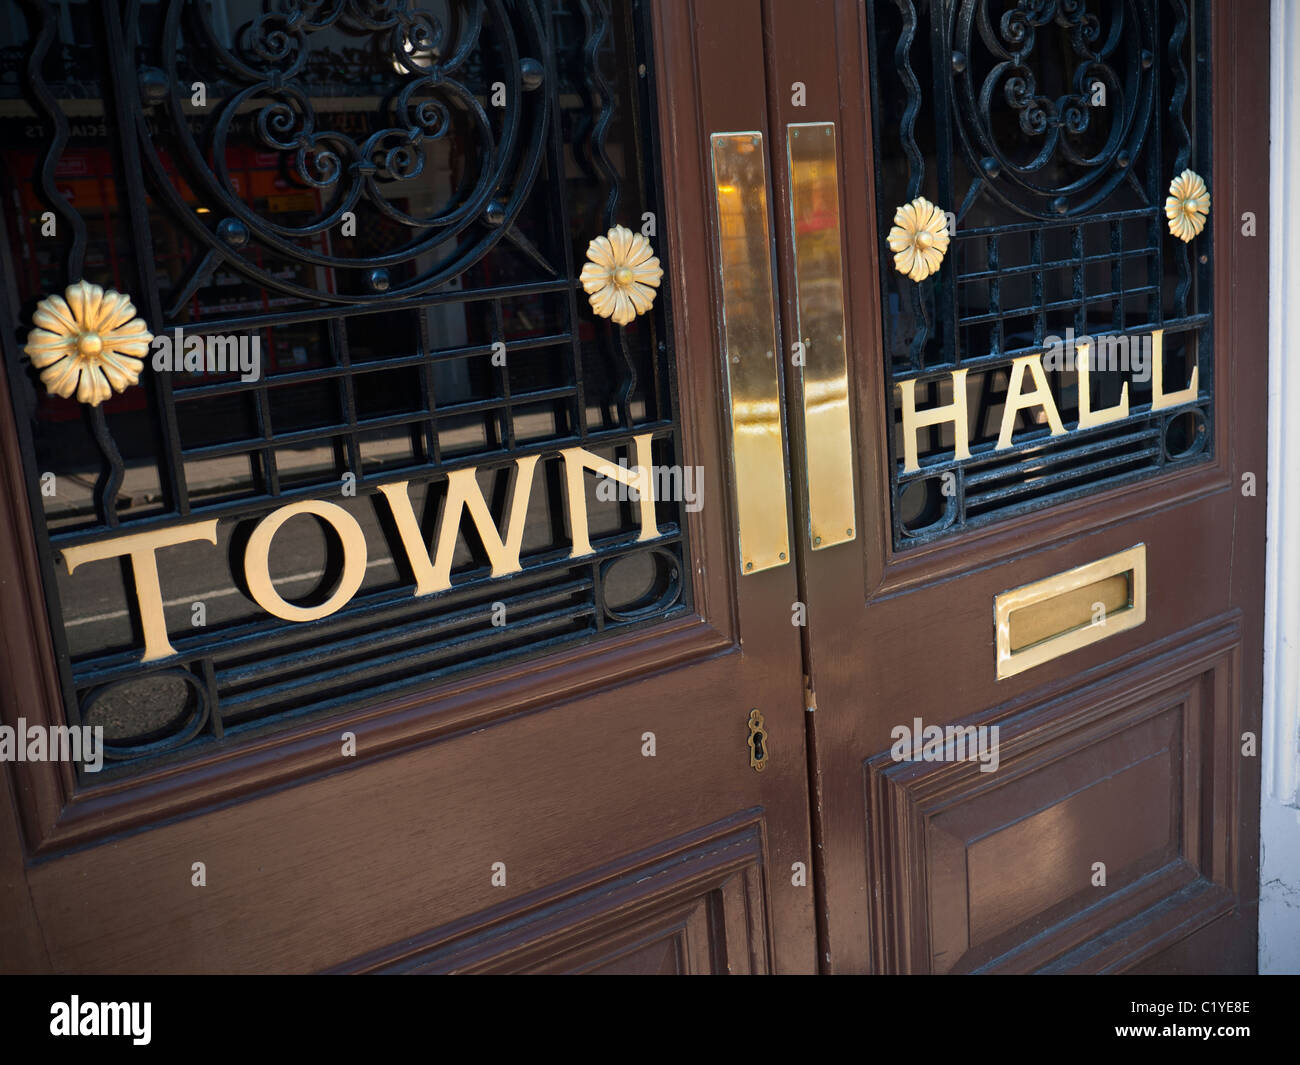 Town hall door sign local government office for voting, elections, local issues, meetings etc, with ornate entrance doors & letter box England  UK Stock Photo